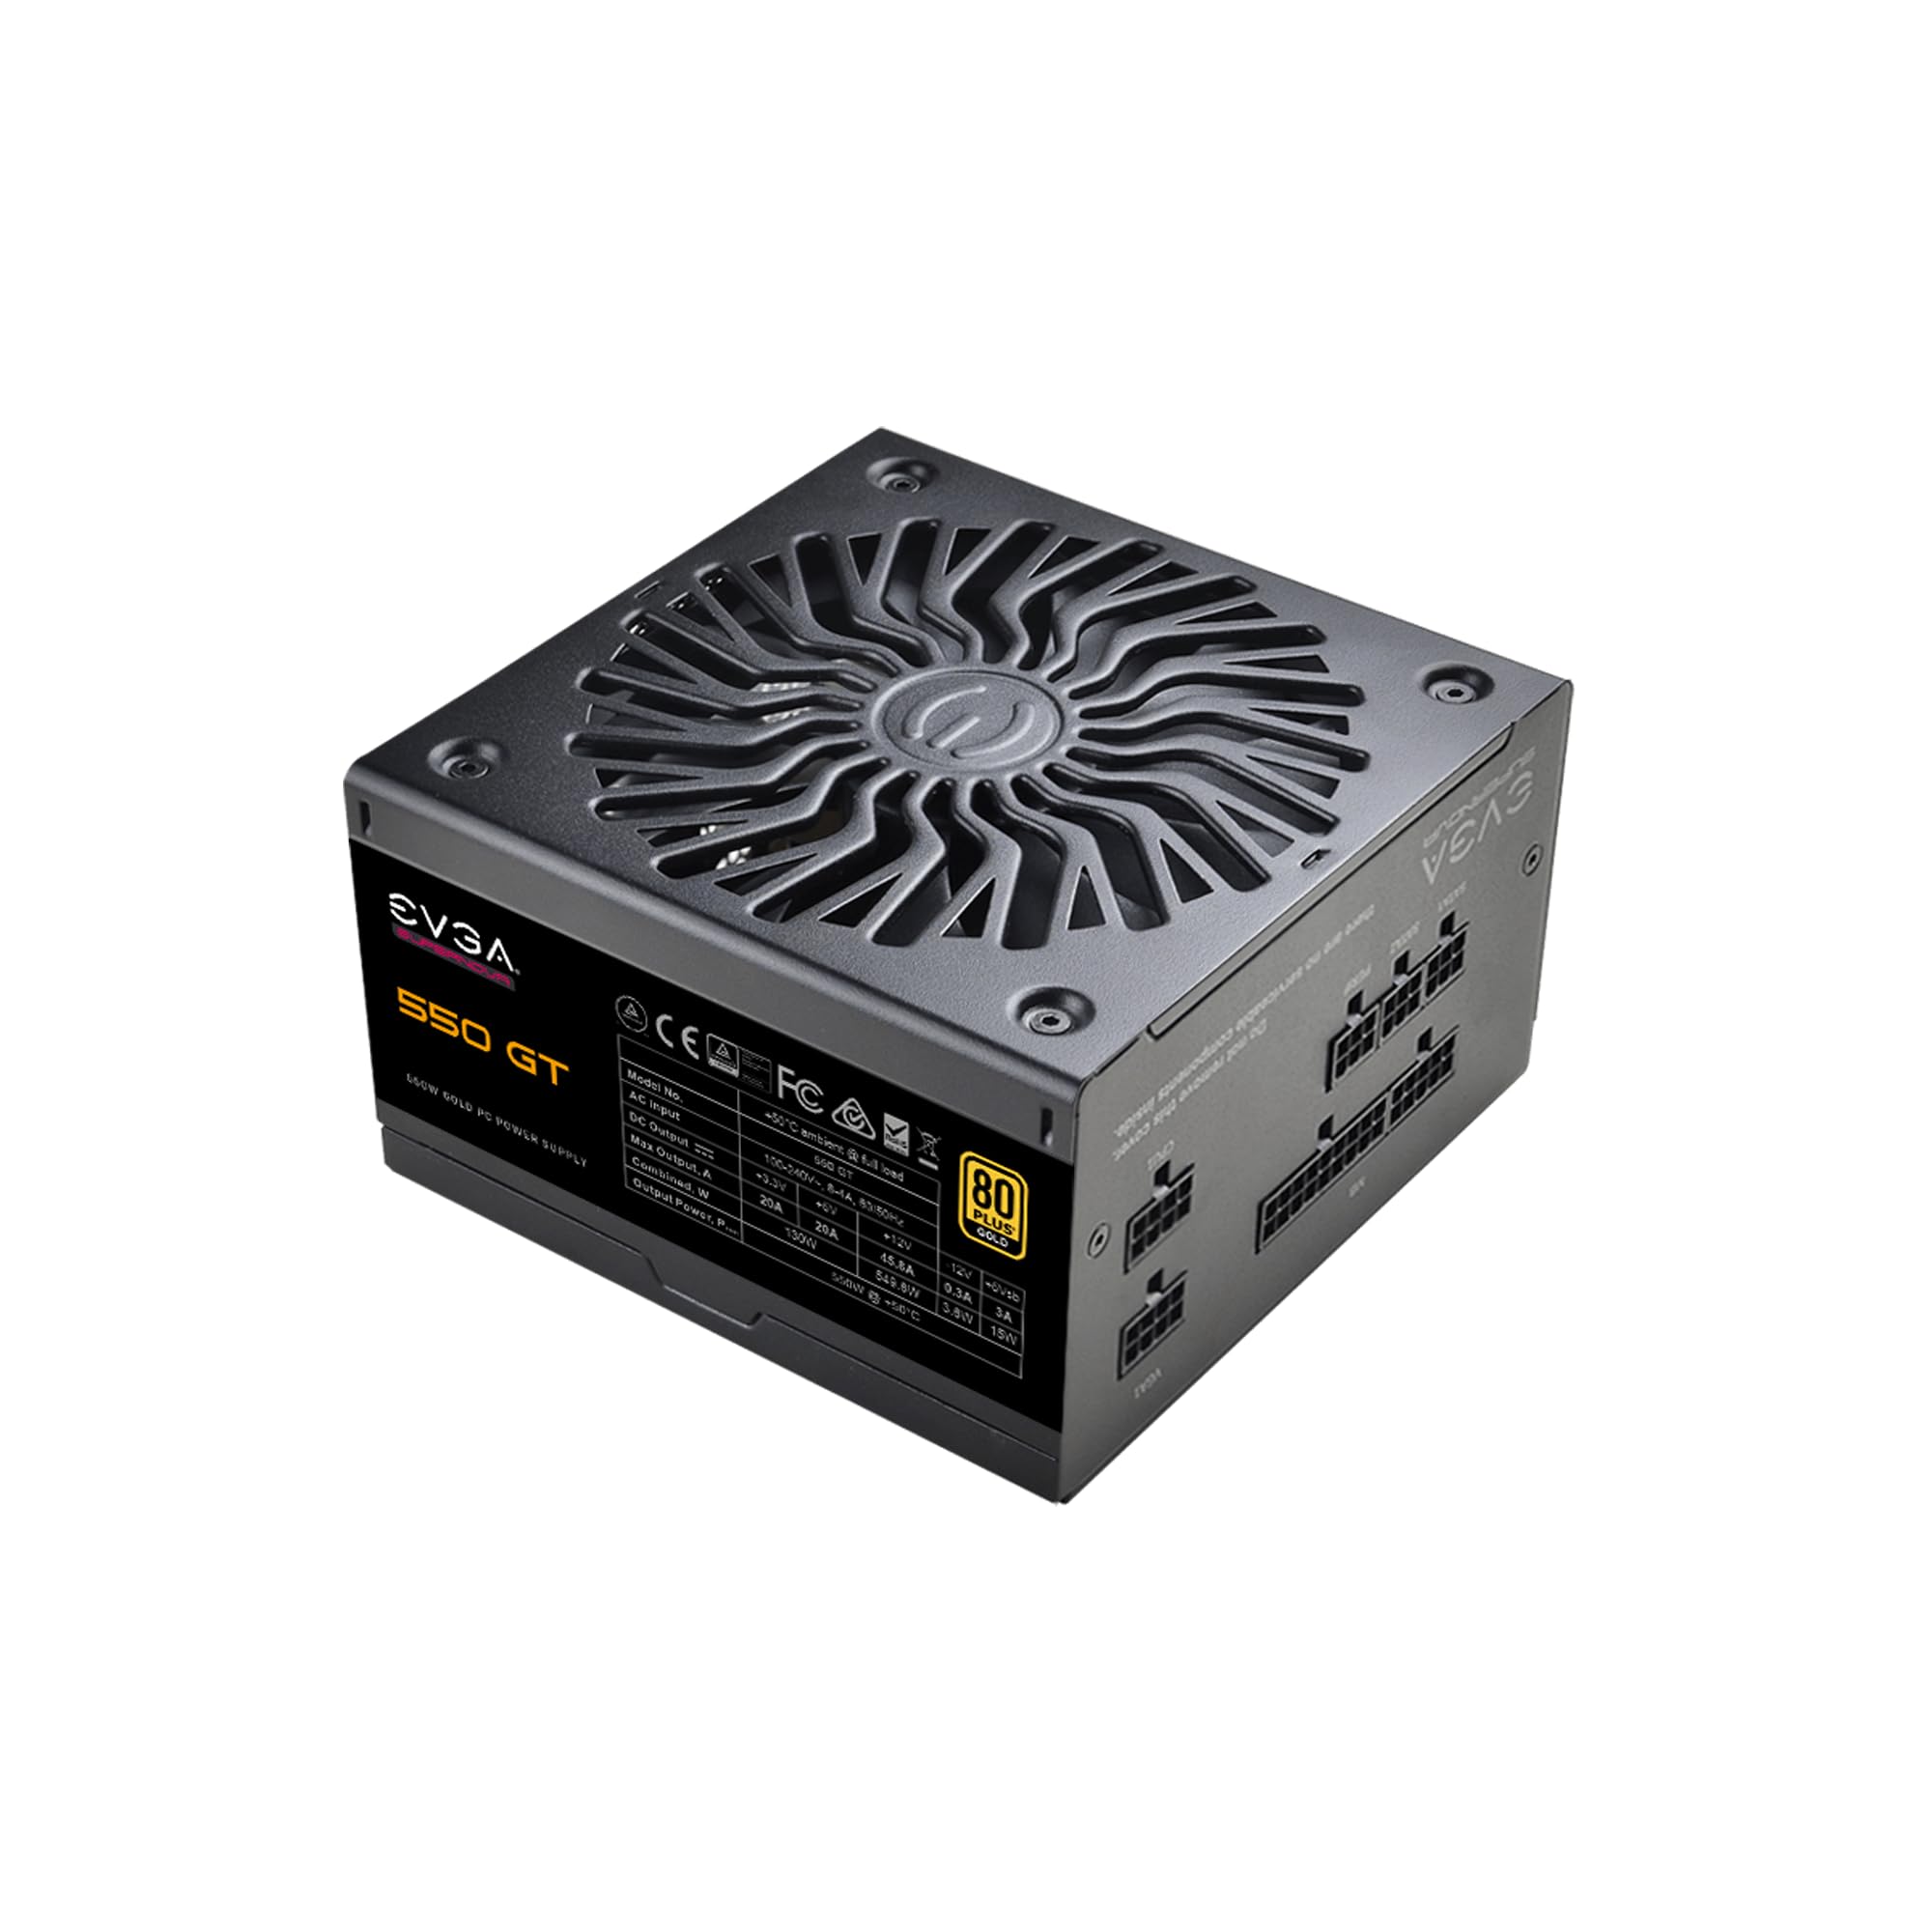 EVGA Supernova 550 GT, 80 Plus Gold 550W, Fully Modular, Auto Eco Mode with FDB Fan, 7 Year Warranty, Includes Power ON Self Tester, Compact 150mm Size, Power Supply 220-GT-0550-Y1